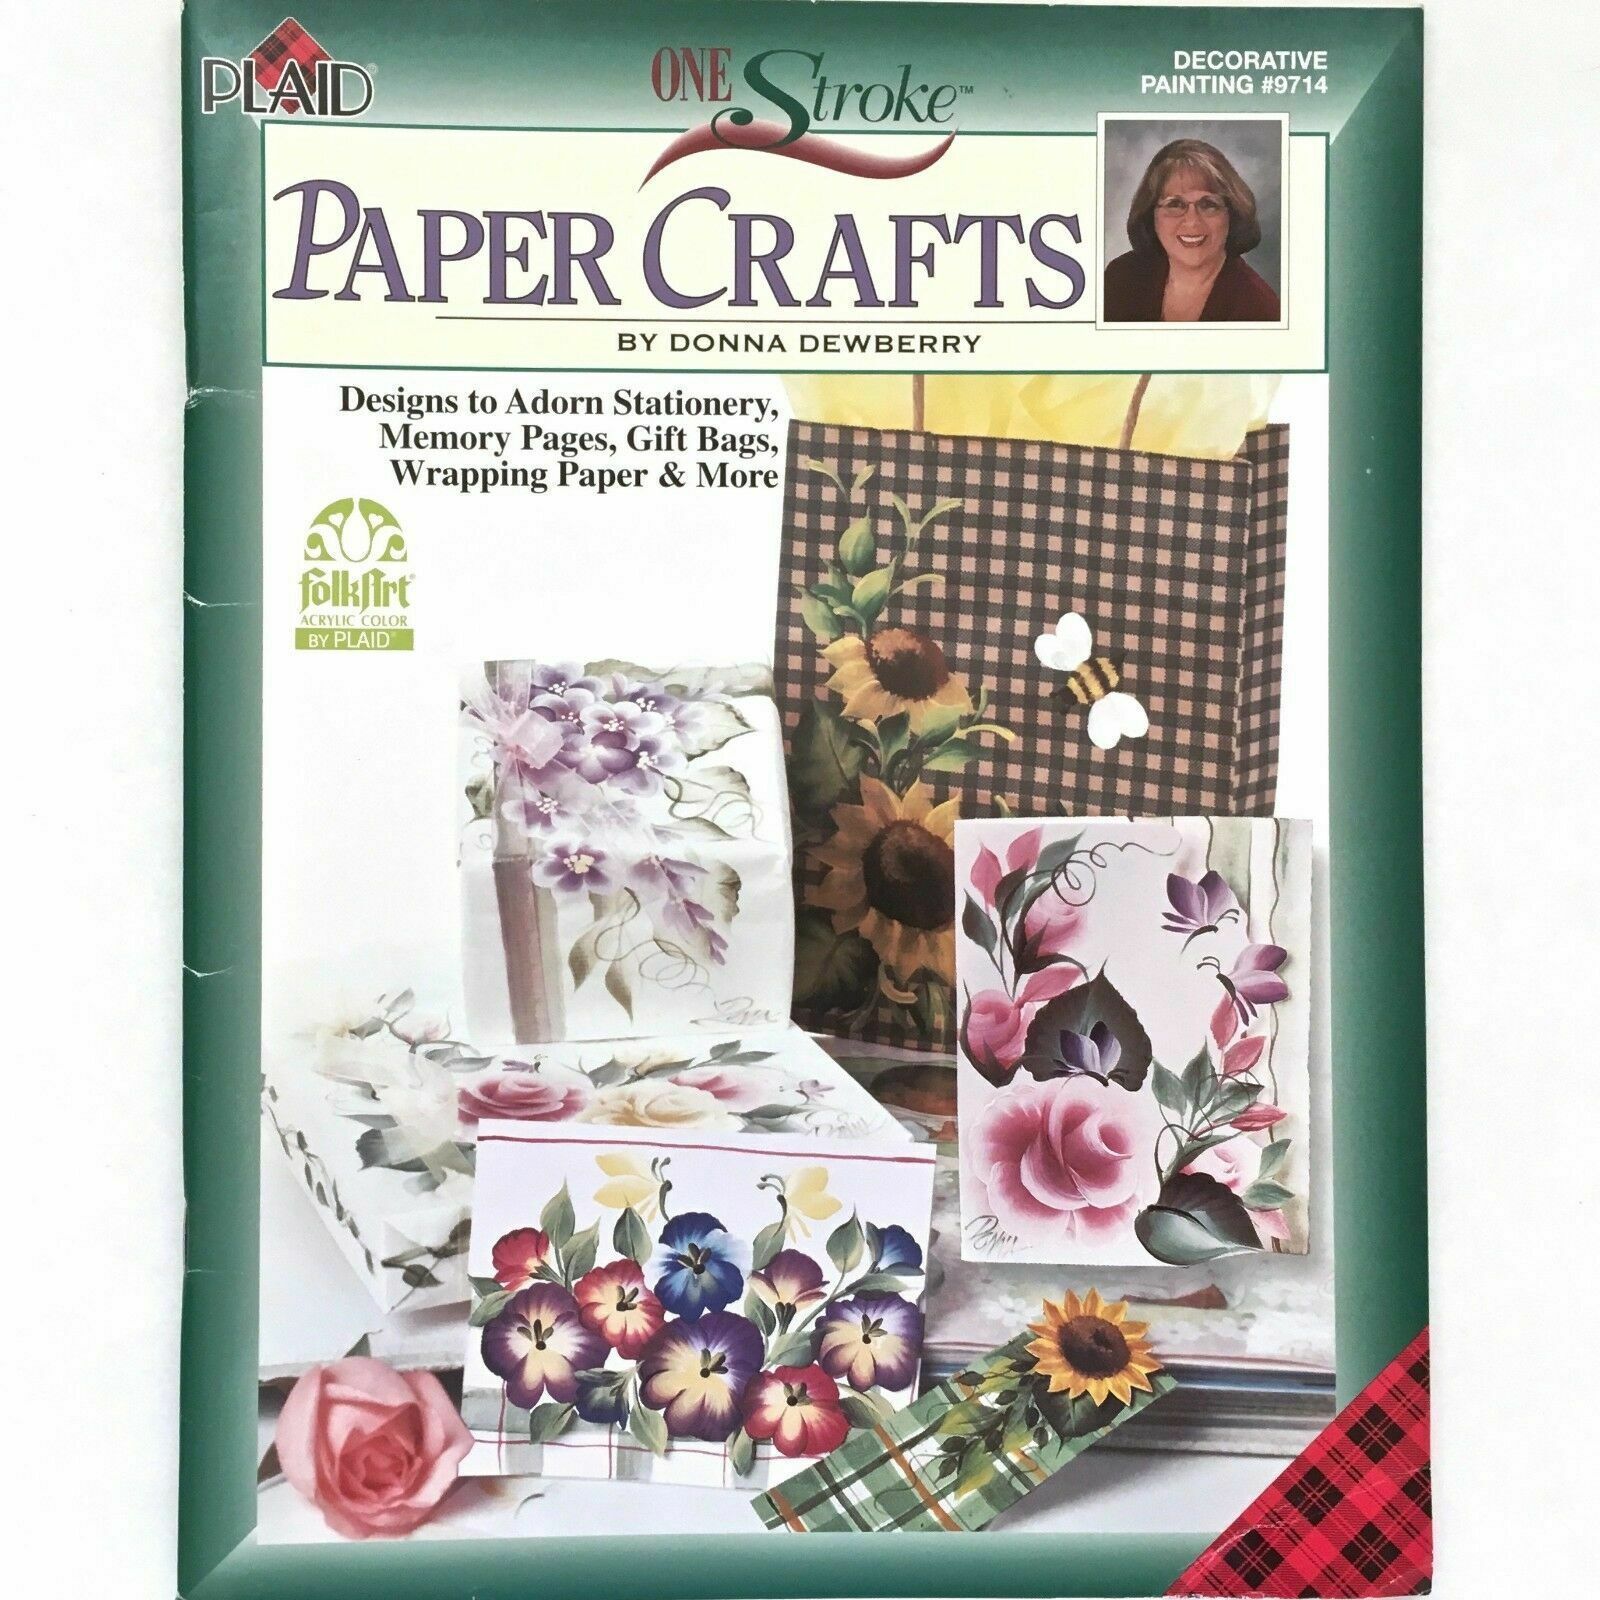 Primary image for PAPER CRAFTS DECORATIVE PAINTING INSTRUCTION BOOK #9714 BY DONNA DEWBERRY PLAID!